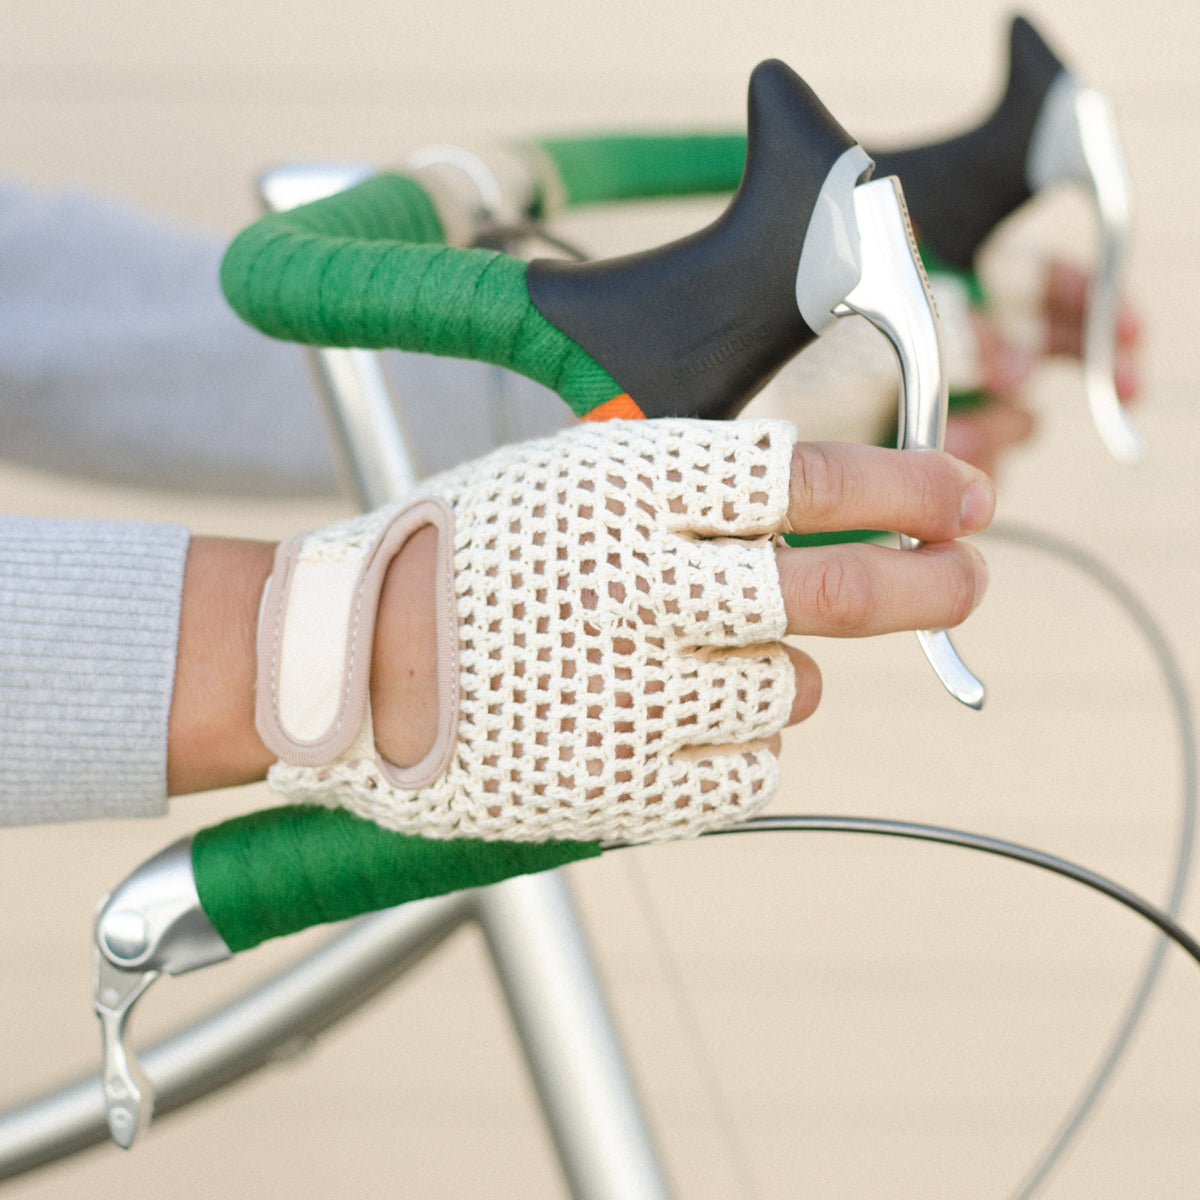 GOAT GLOVES, the G.O.A.T. gloves – Rivendell Bicycle Works